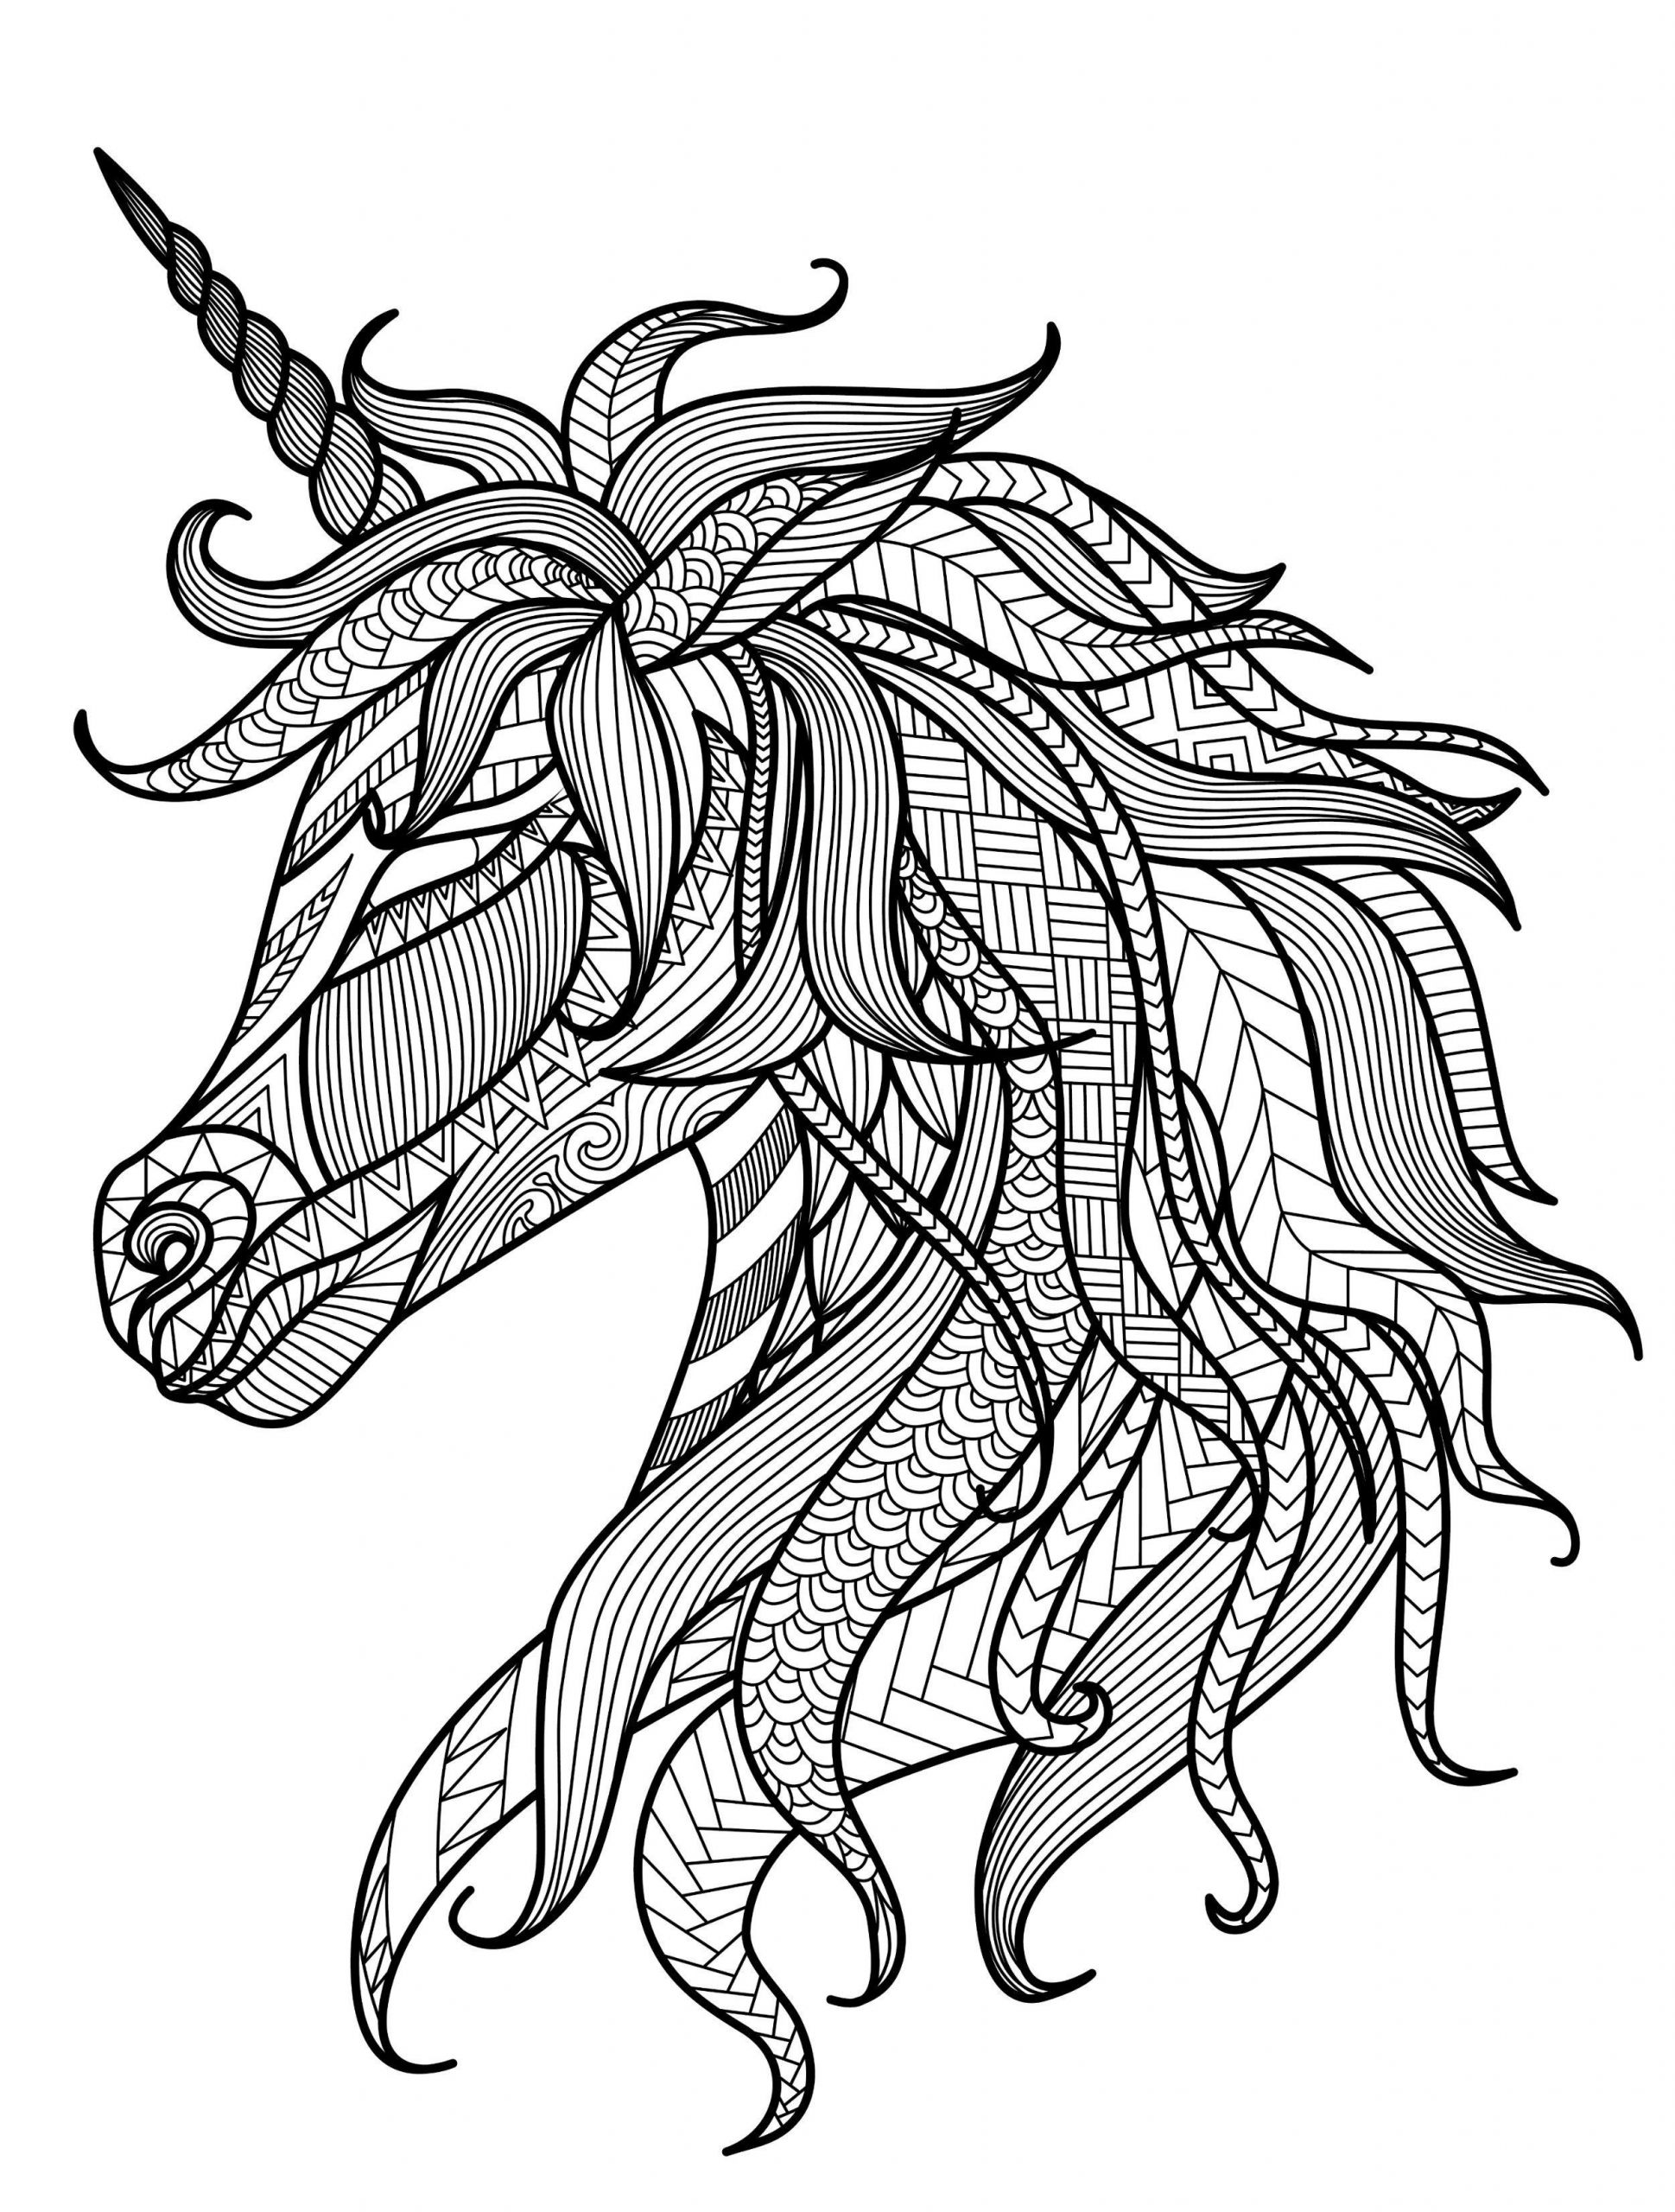 Free Unicorn Coloring Pages For Adults
 20 Gorgeous Free Printable Adult Coloring Pages Page 5